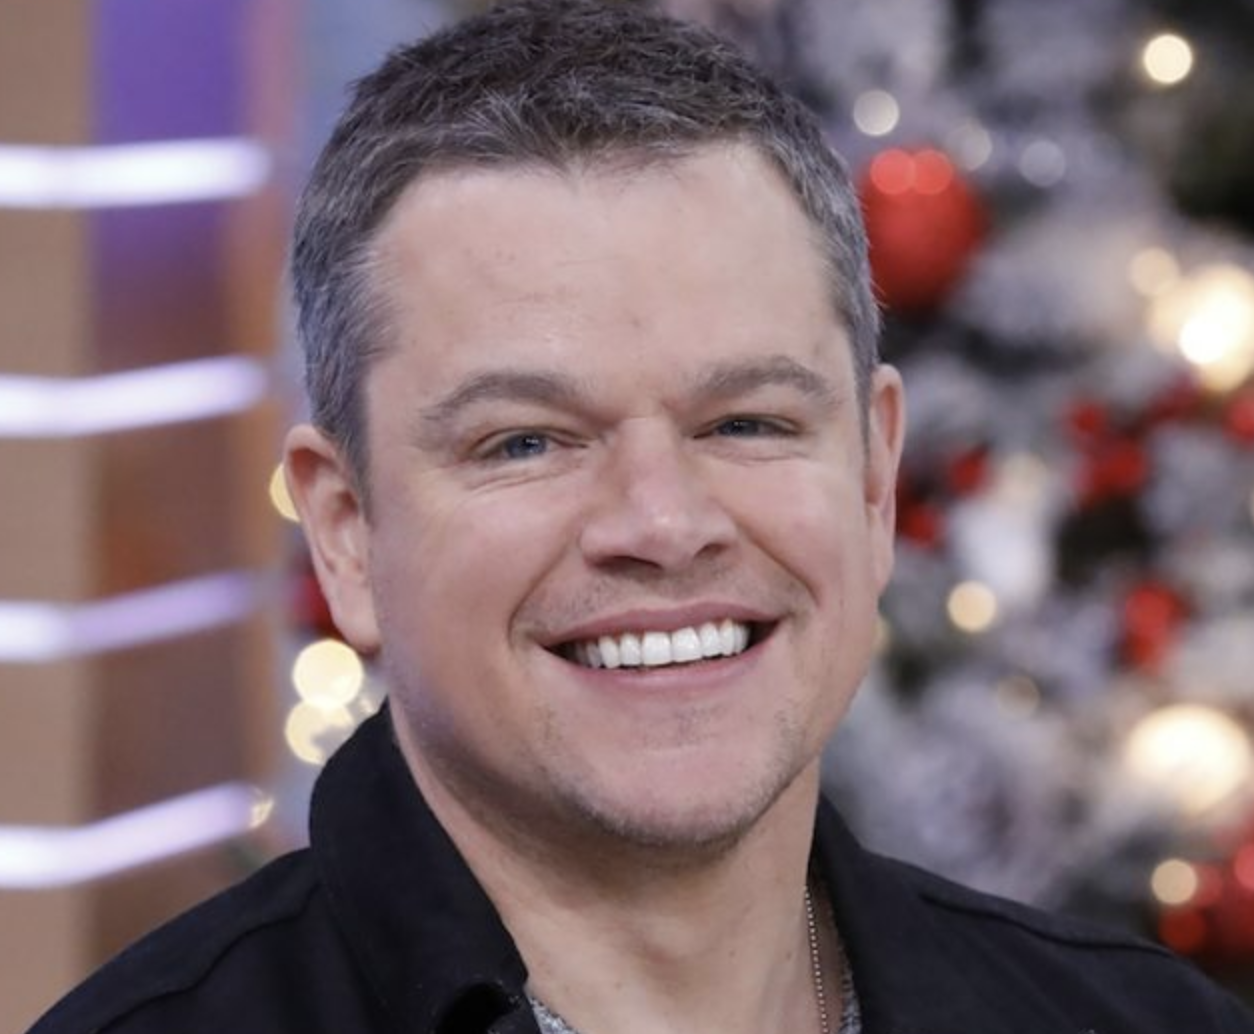 LISTEN: Why What Matt Damon Is Saying Is Not That Bad